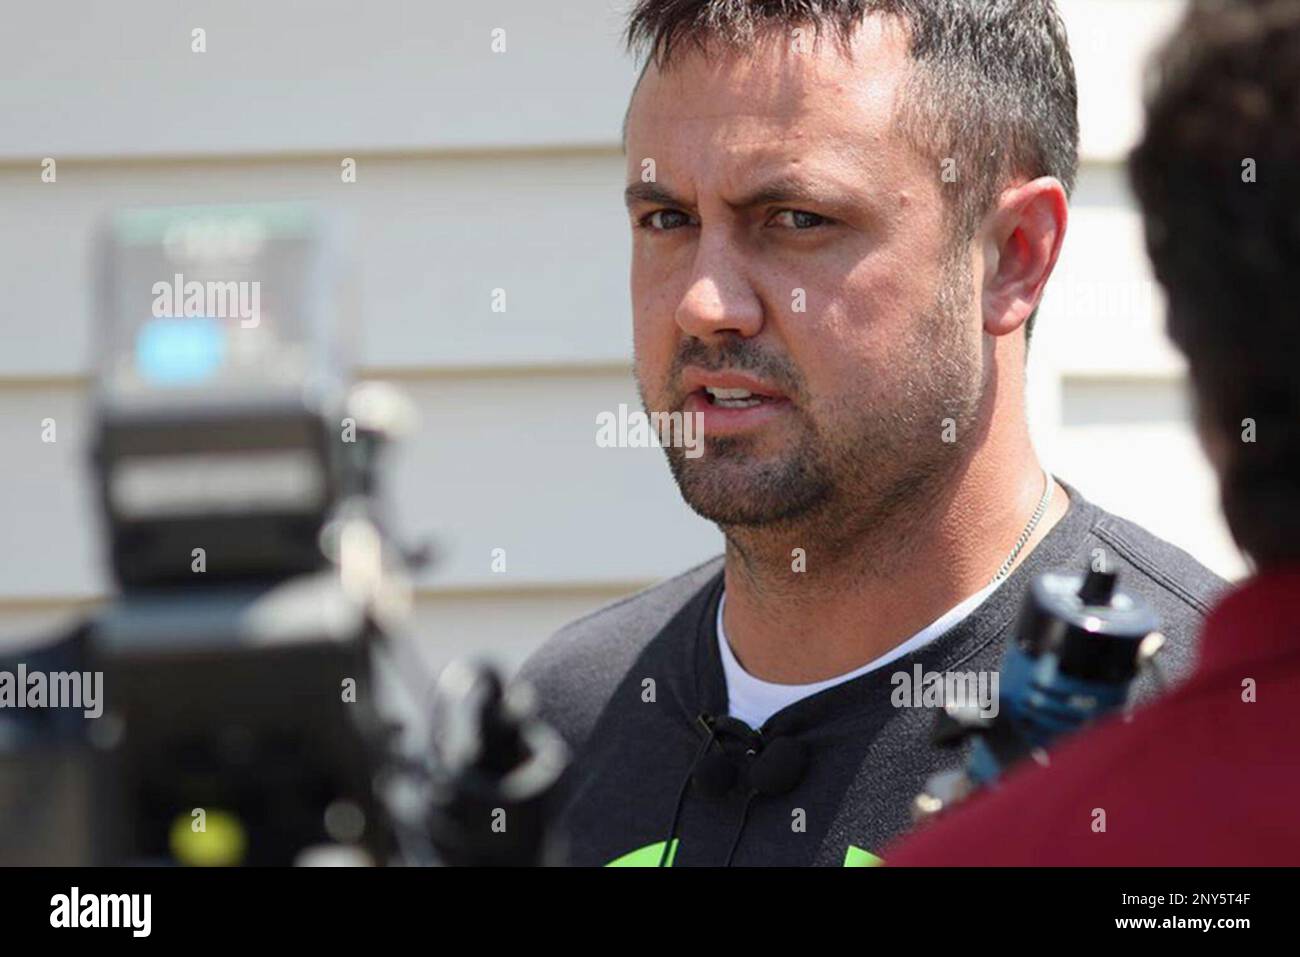 FILE - In this July 24, 2017, file photo, Brian Pyle, owner of Pyle Transportation Inc., the Iowa trucking company involved in a deadly case of immigrant smuggling in Texas, speaks to reporters in Schaller, Iowa. Federal safety regulators on Monday, Oct. 9, 2017, shut down the troubled Iowa trucking company after a review found the company's safety rating was unsatisfactory. (Jared Strong/Carroll Daily Times Herald via AP, File) Stock Photo